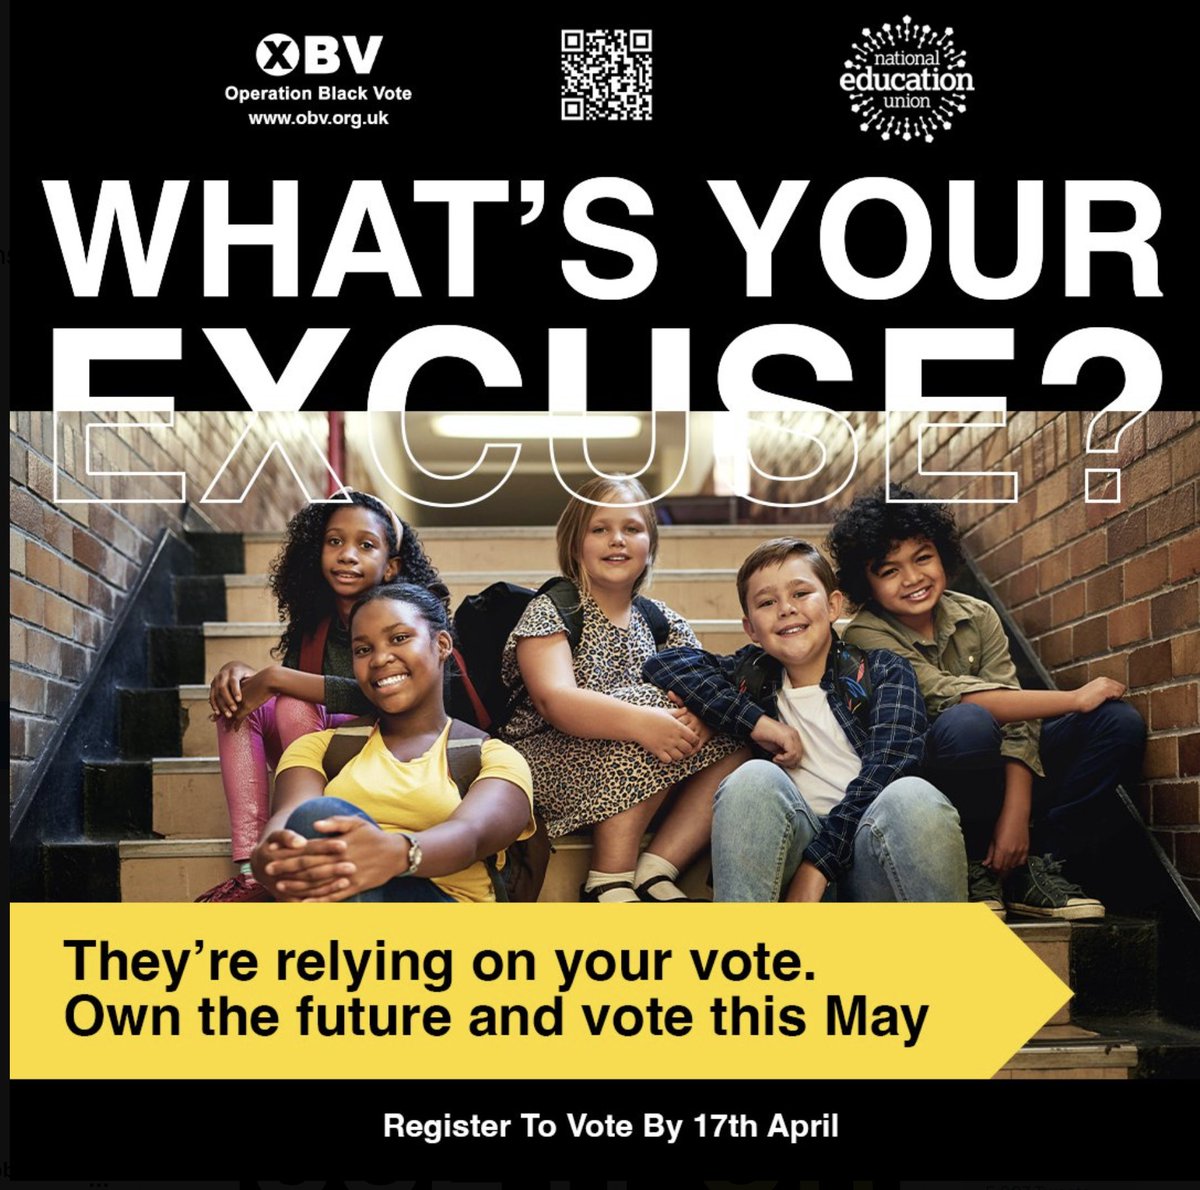 We're too young to vote.  #Racism #SmallBoats #PakistaniMen #CaseyReport #ChildQ #Prevent #StopAndSearch #SarahEverard #NicholeAndBibba #Islamphobia #Brexit #HateCrime #Covid19 #PoliceRacism #EthnicPayGap #NHSRacisn #Homophobia #VoterSupression #LocalElections2023